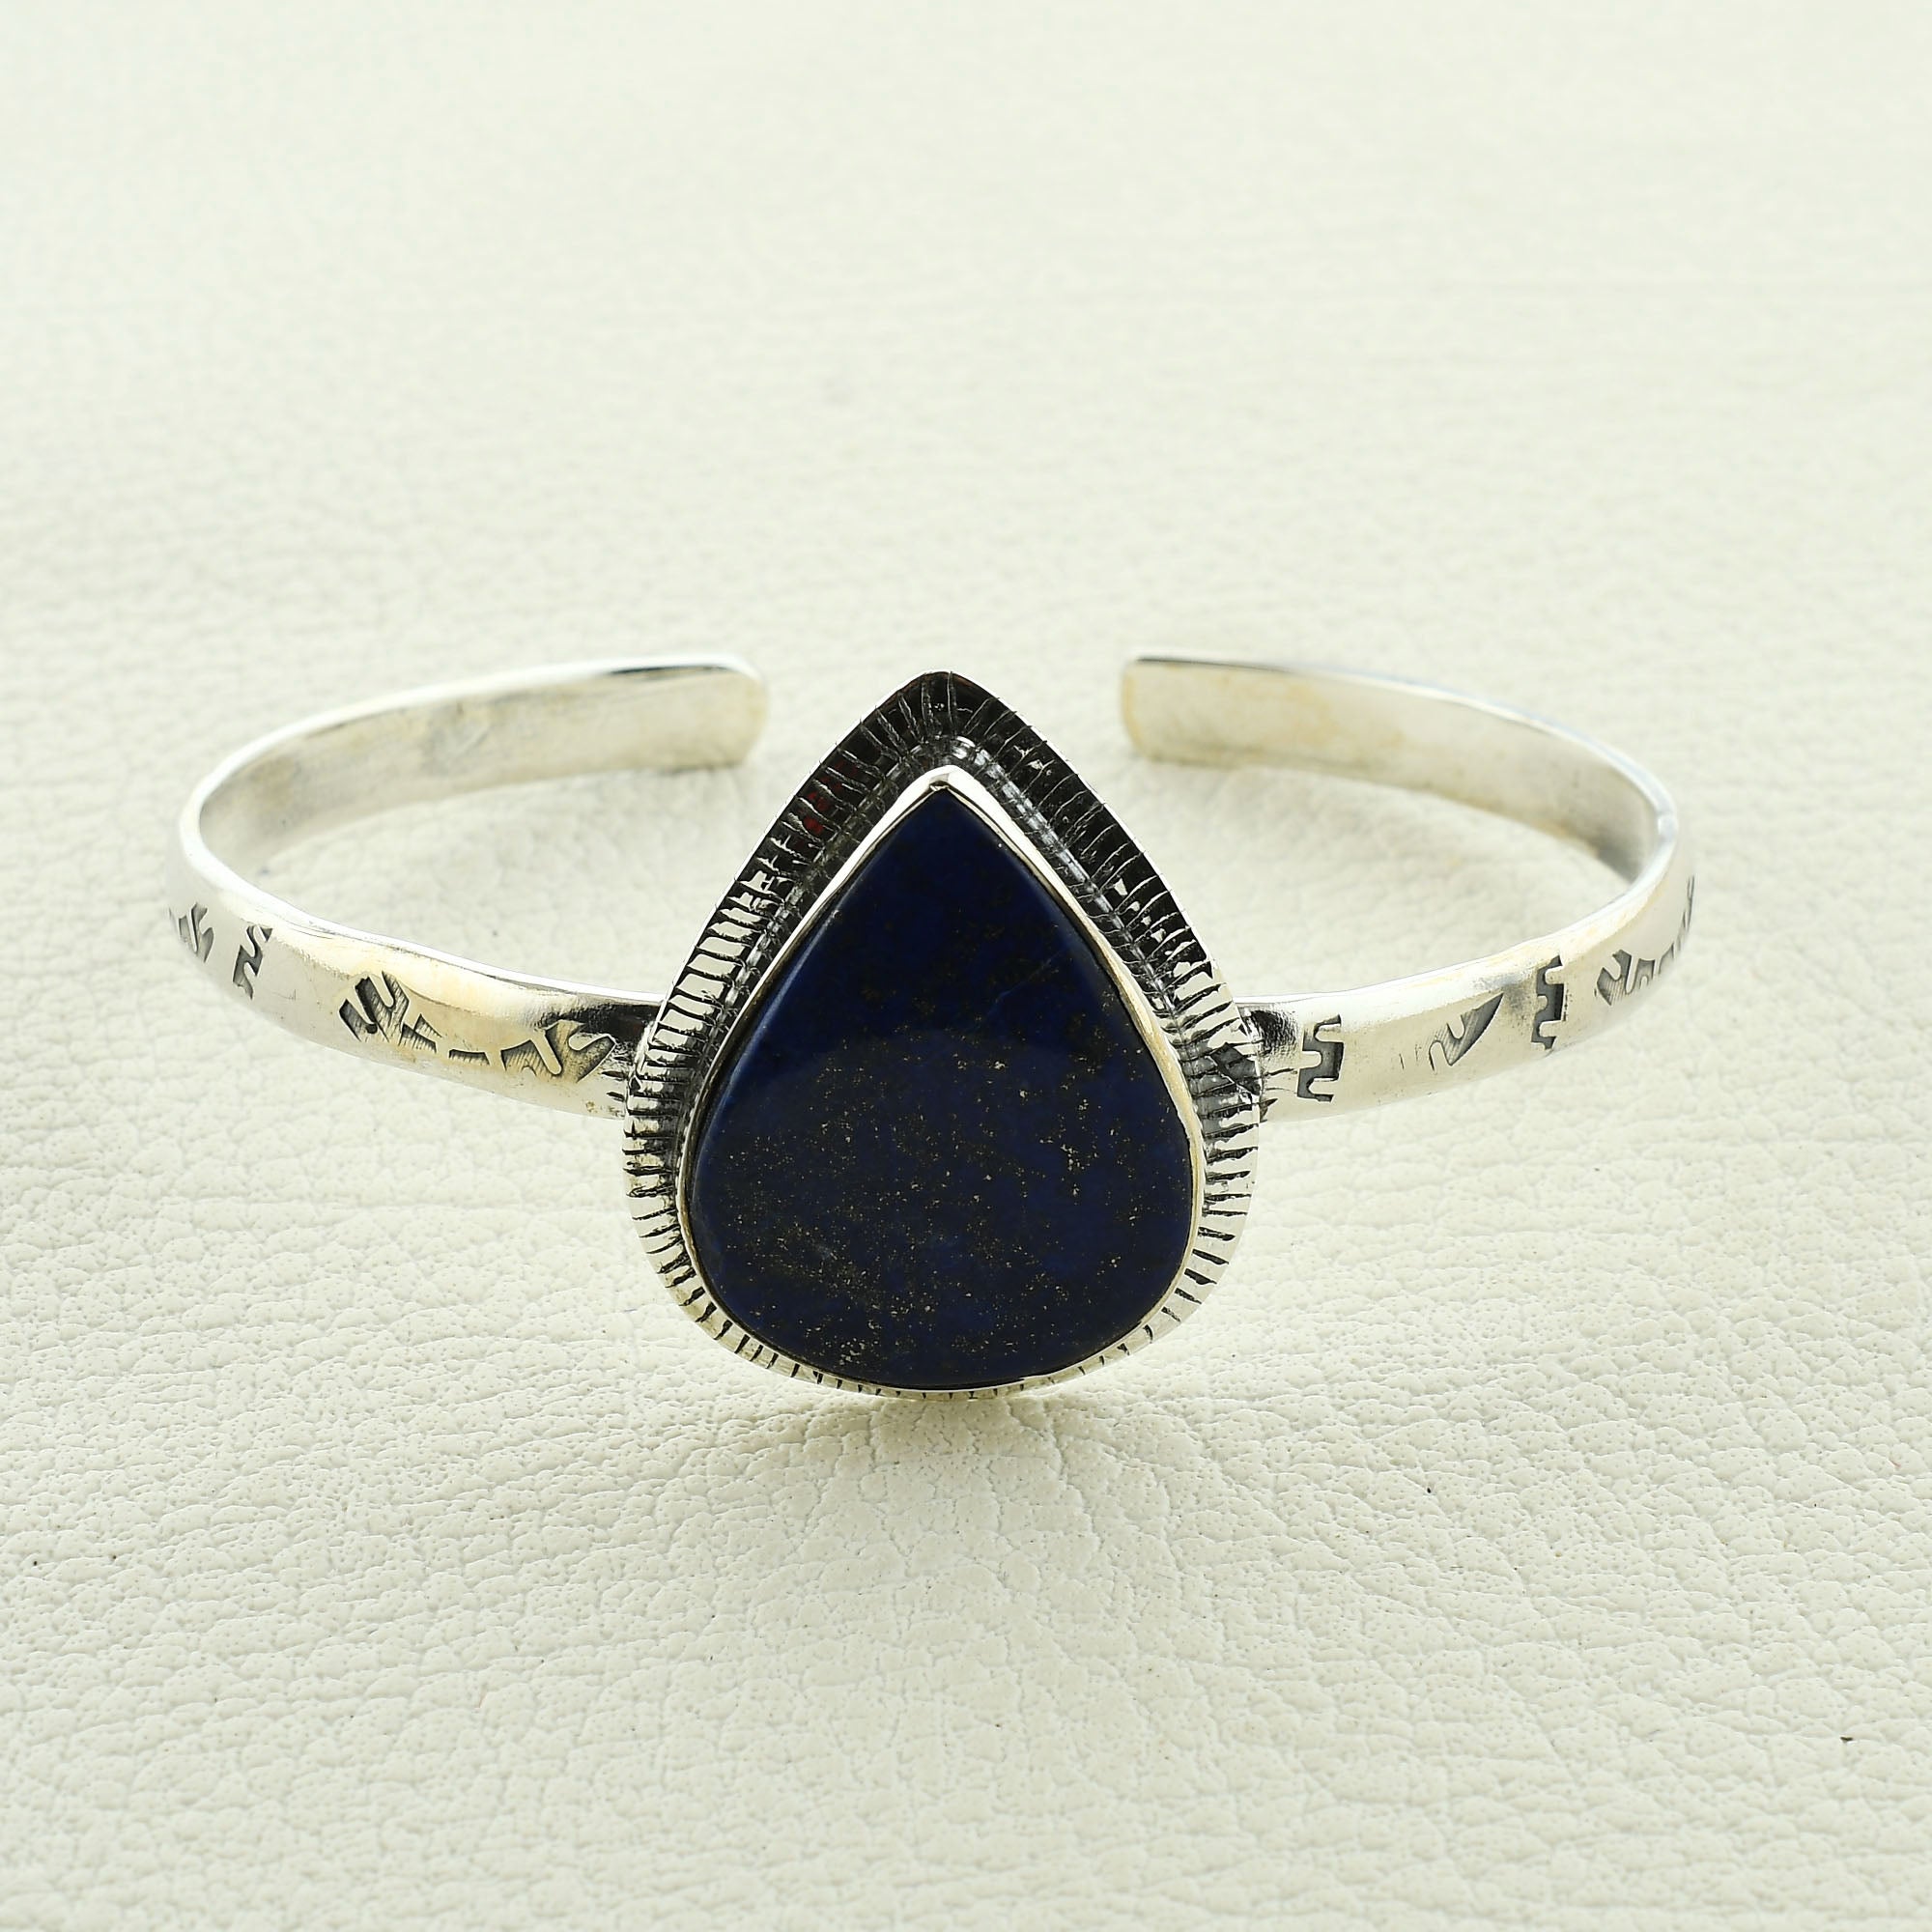 Lapis Lazuli with Sterling Silver Bangle